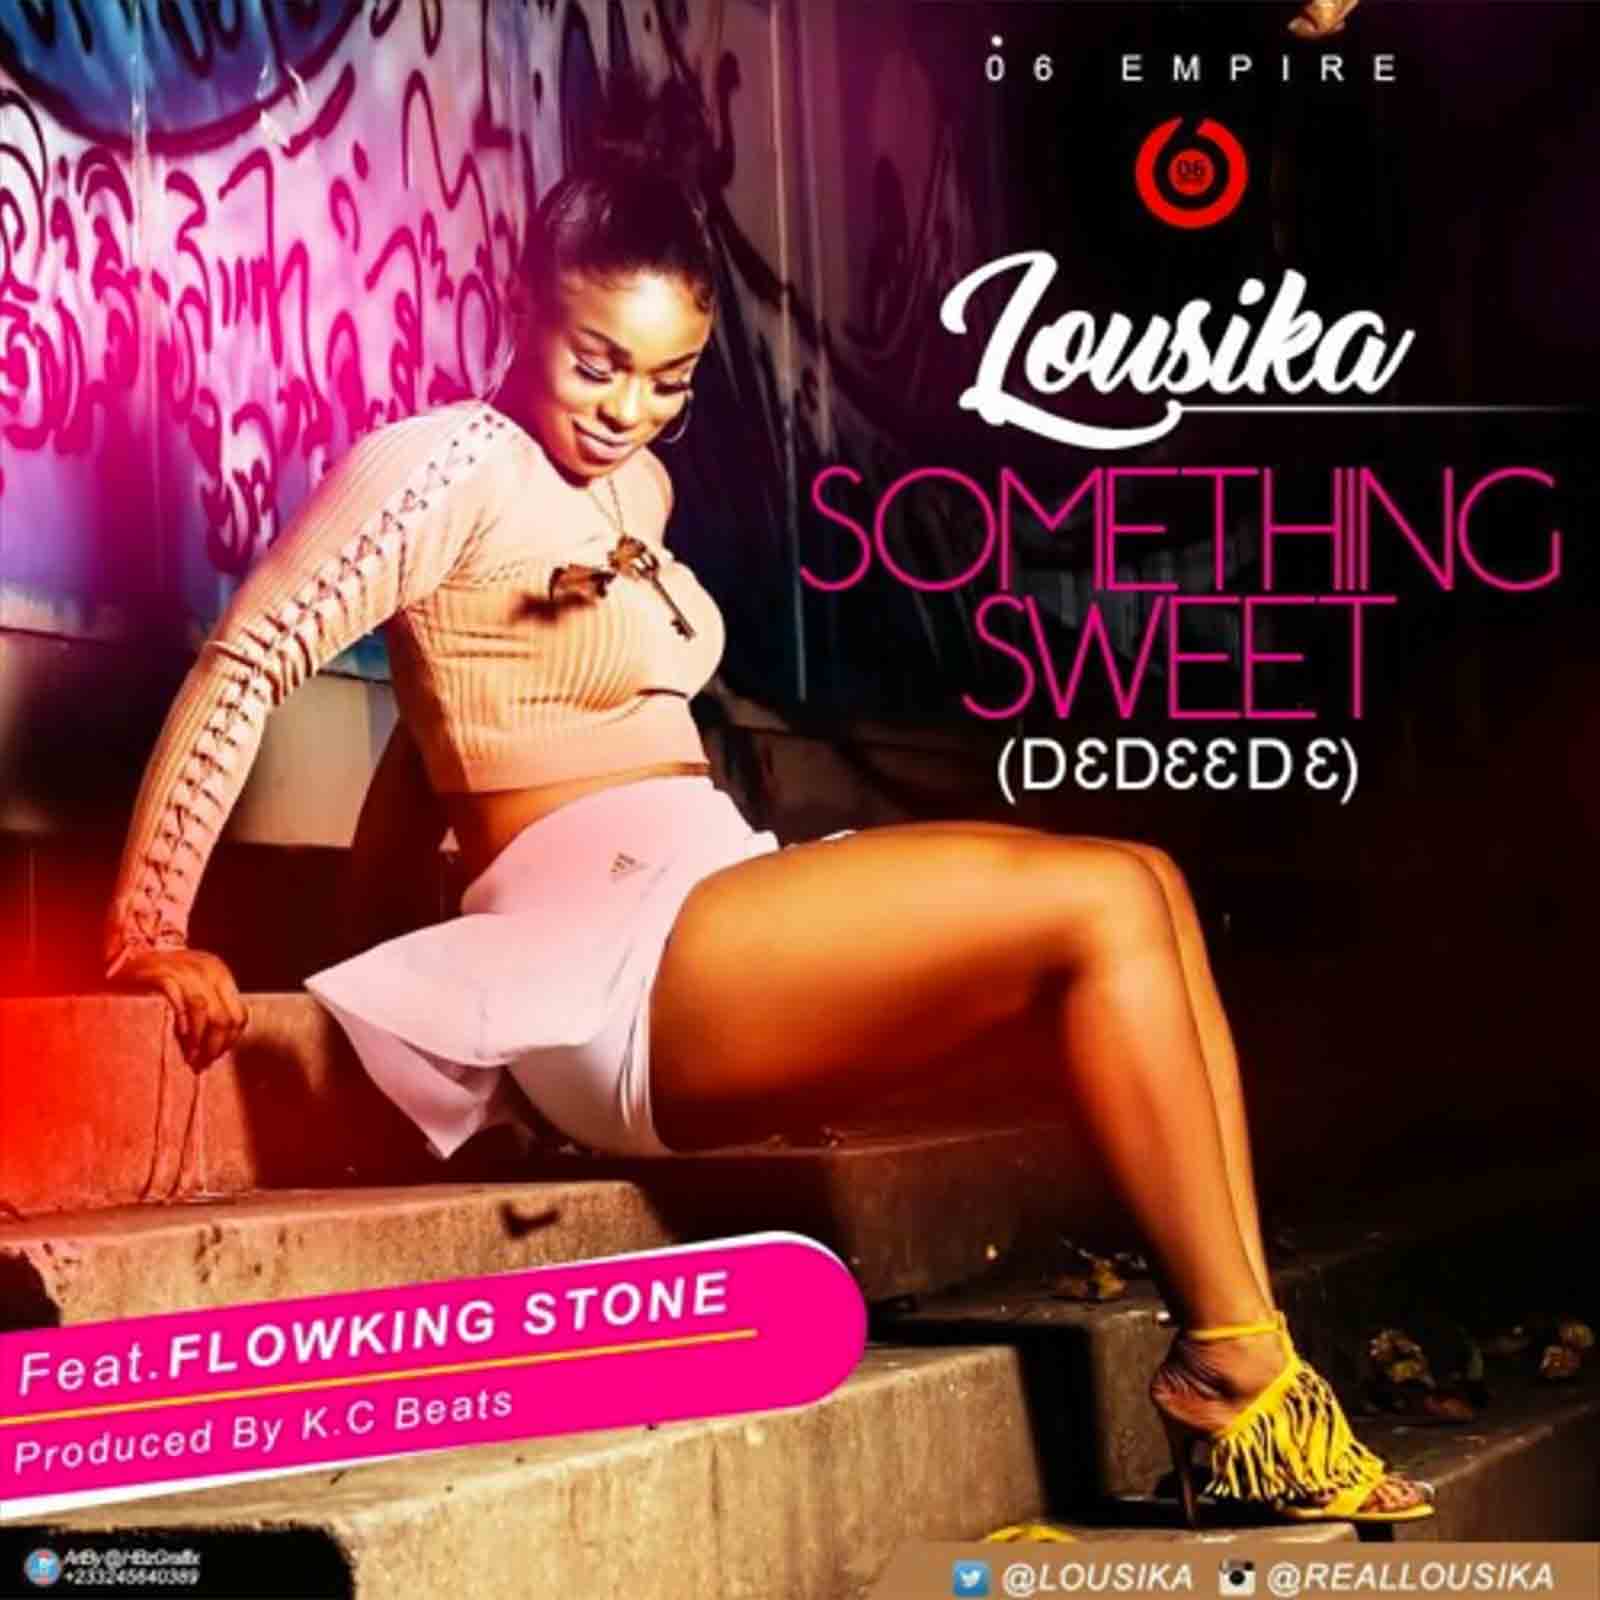 Something Sweet (D3d33d3) by Lousika feat. Flowking Stone